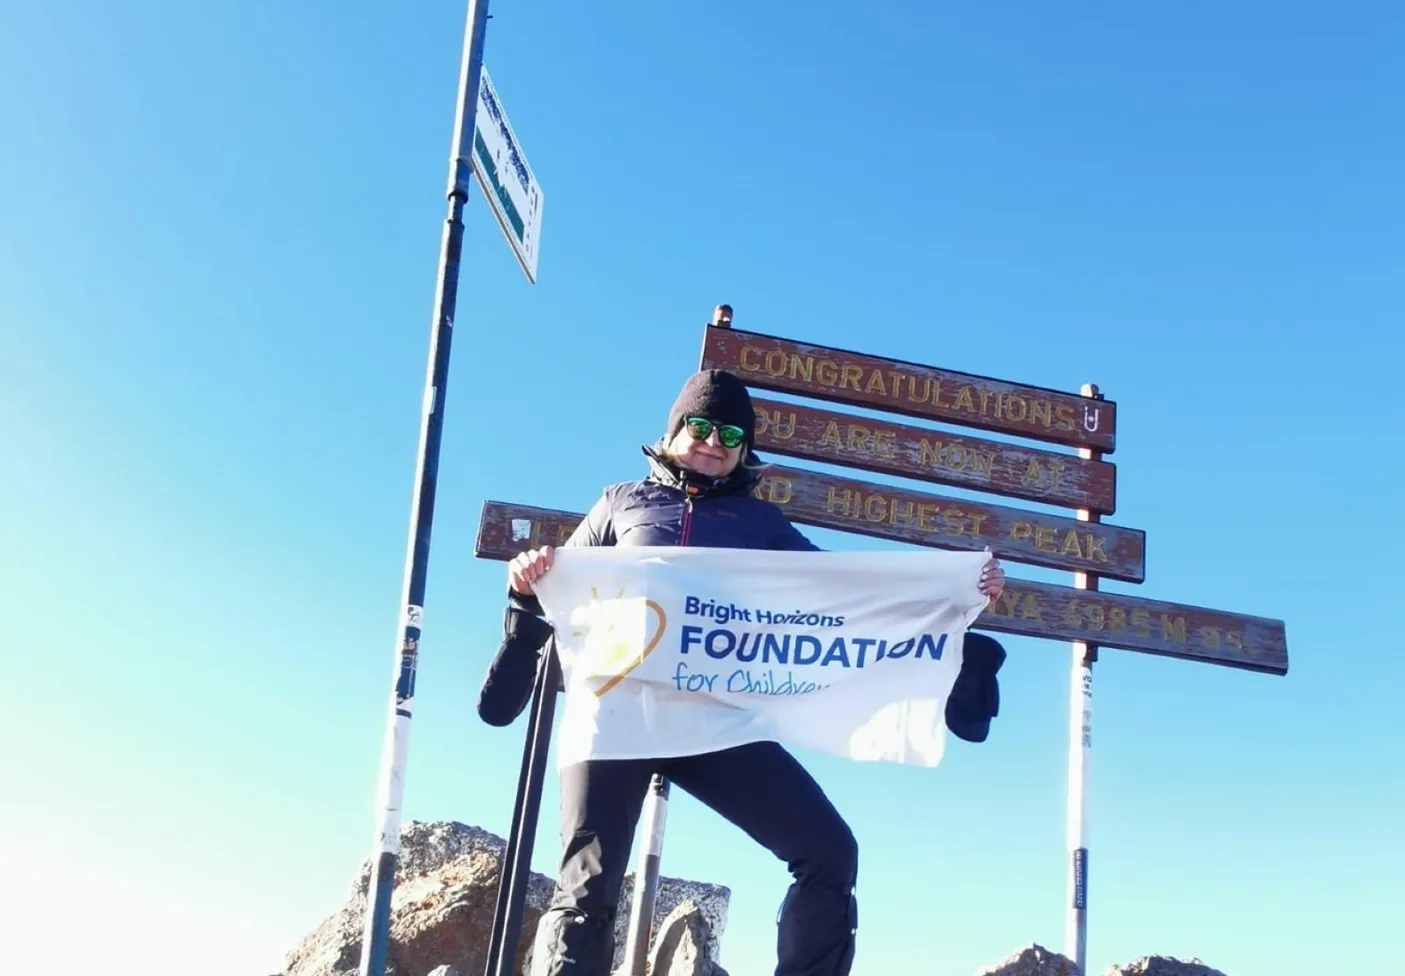 Severica said: “Standing on the summit of Mount Kenya, I felt a surge of emotions. Reaching this peak wasn't just about personal achievement; it was about the children facing unimaginable trauma